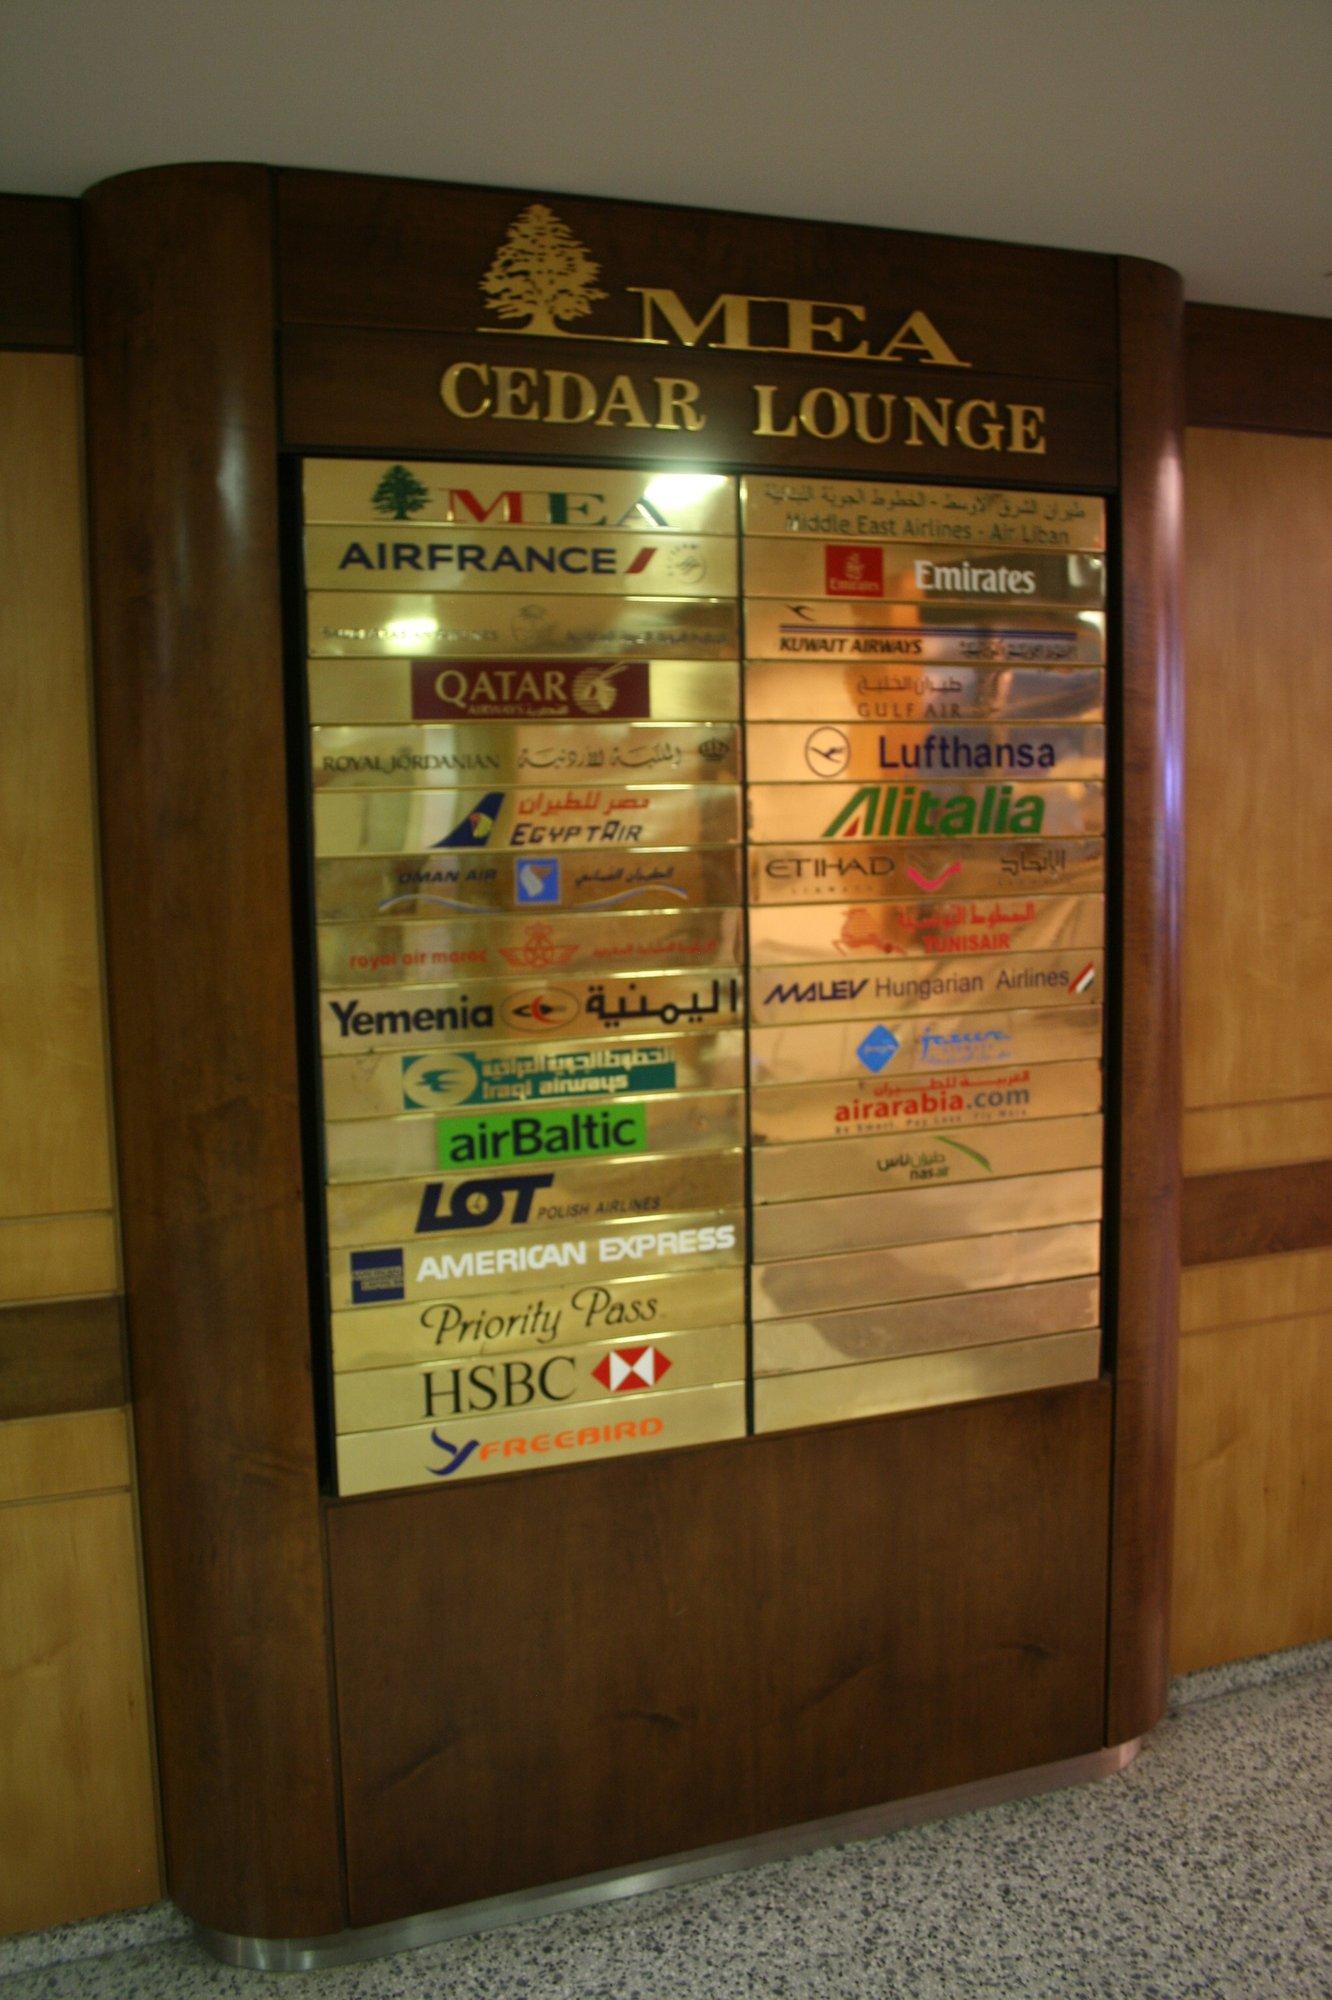 Middle East Airlines Cedar Lounge image 14 of 18